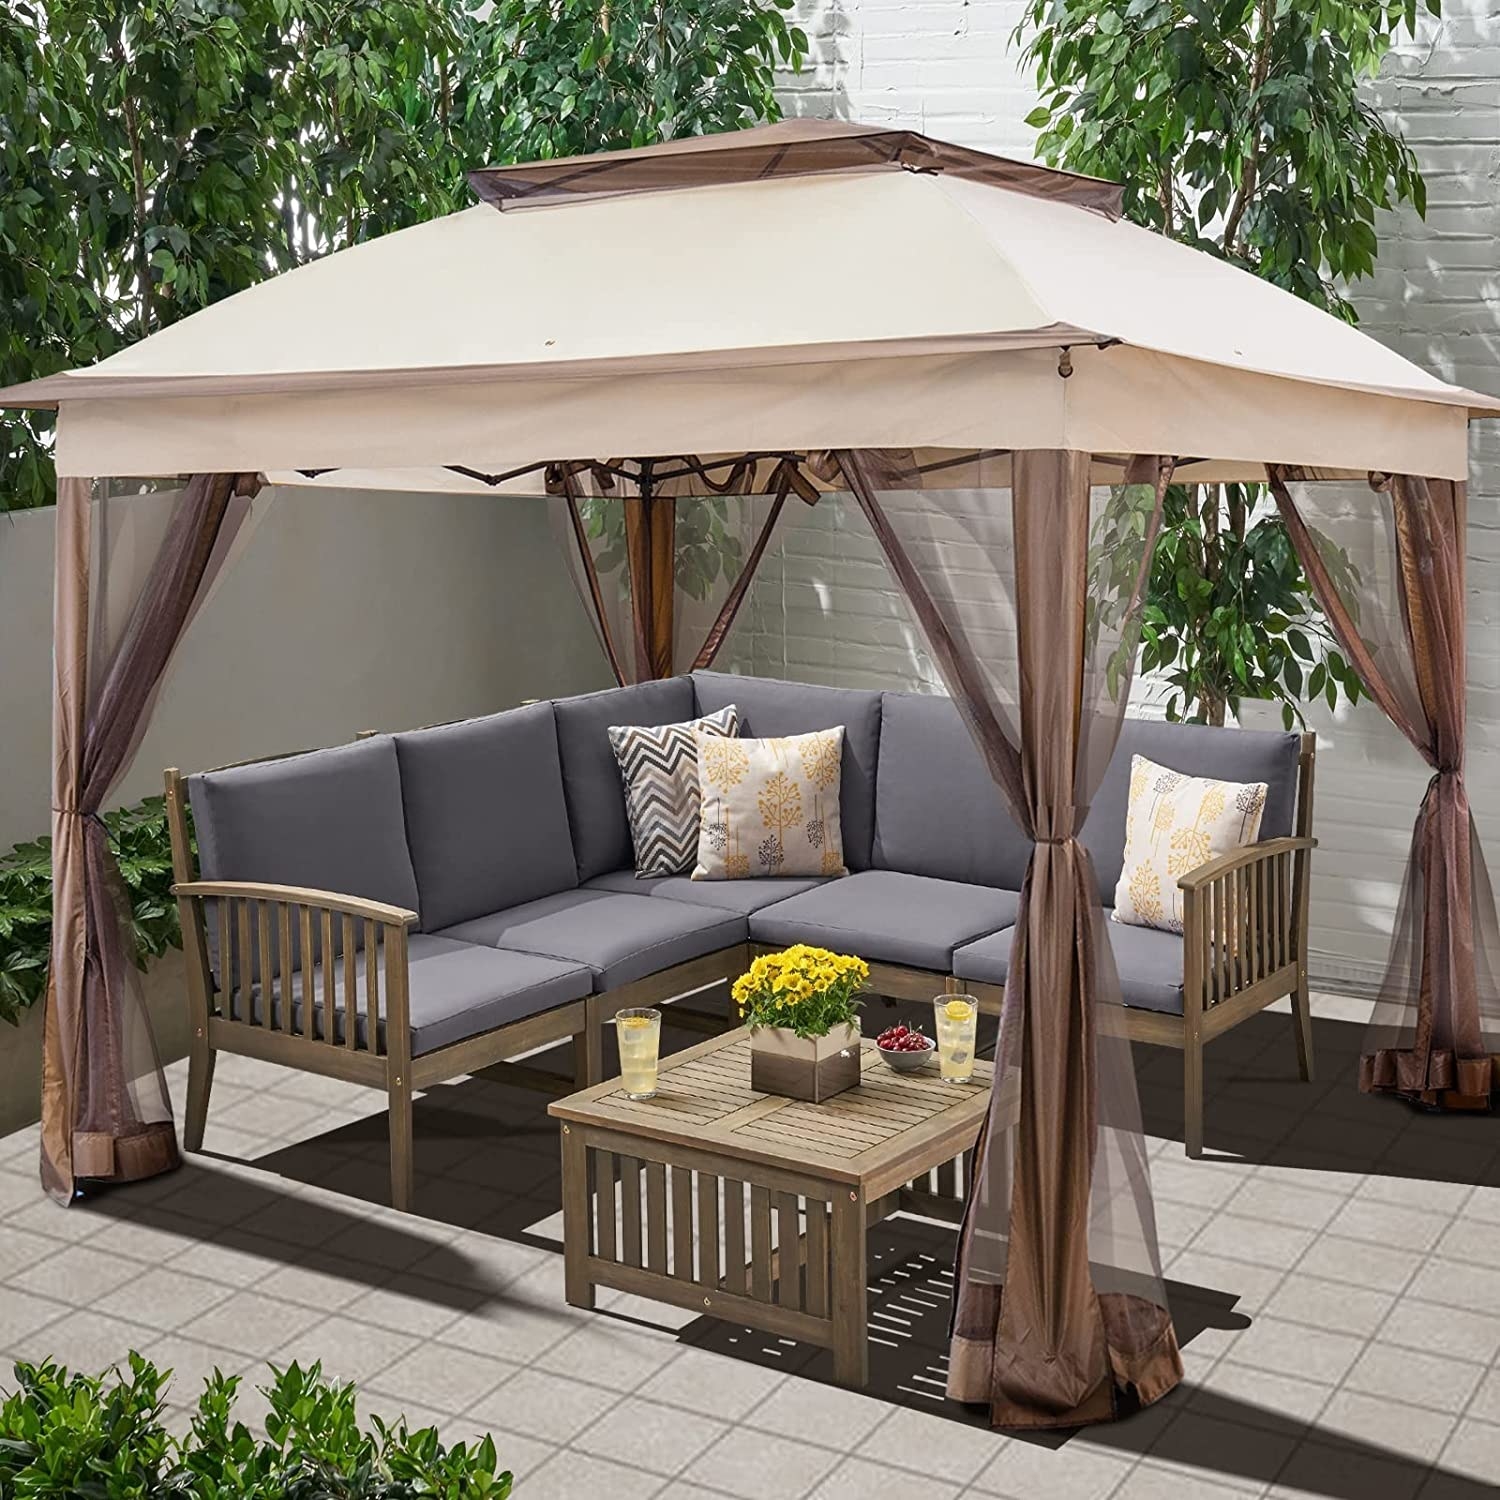 The gazebo outside with a couch and table underneath it and greenery around it